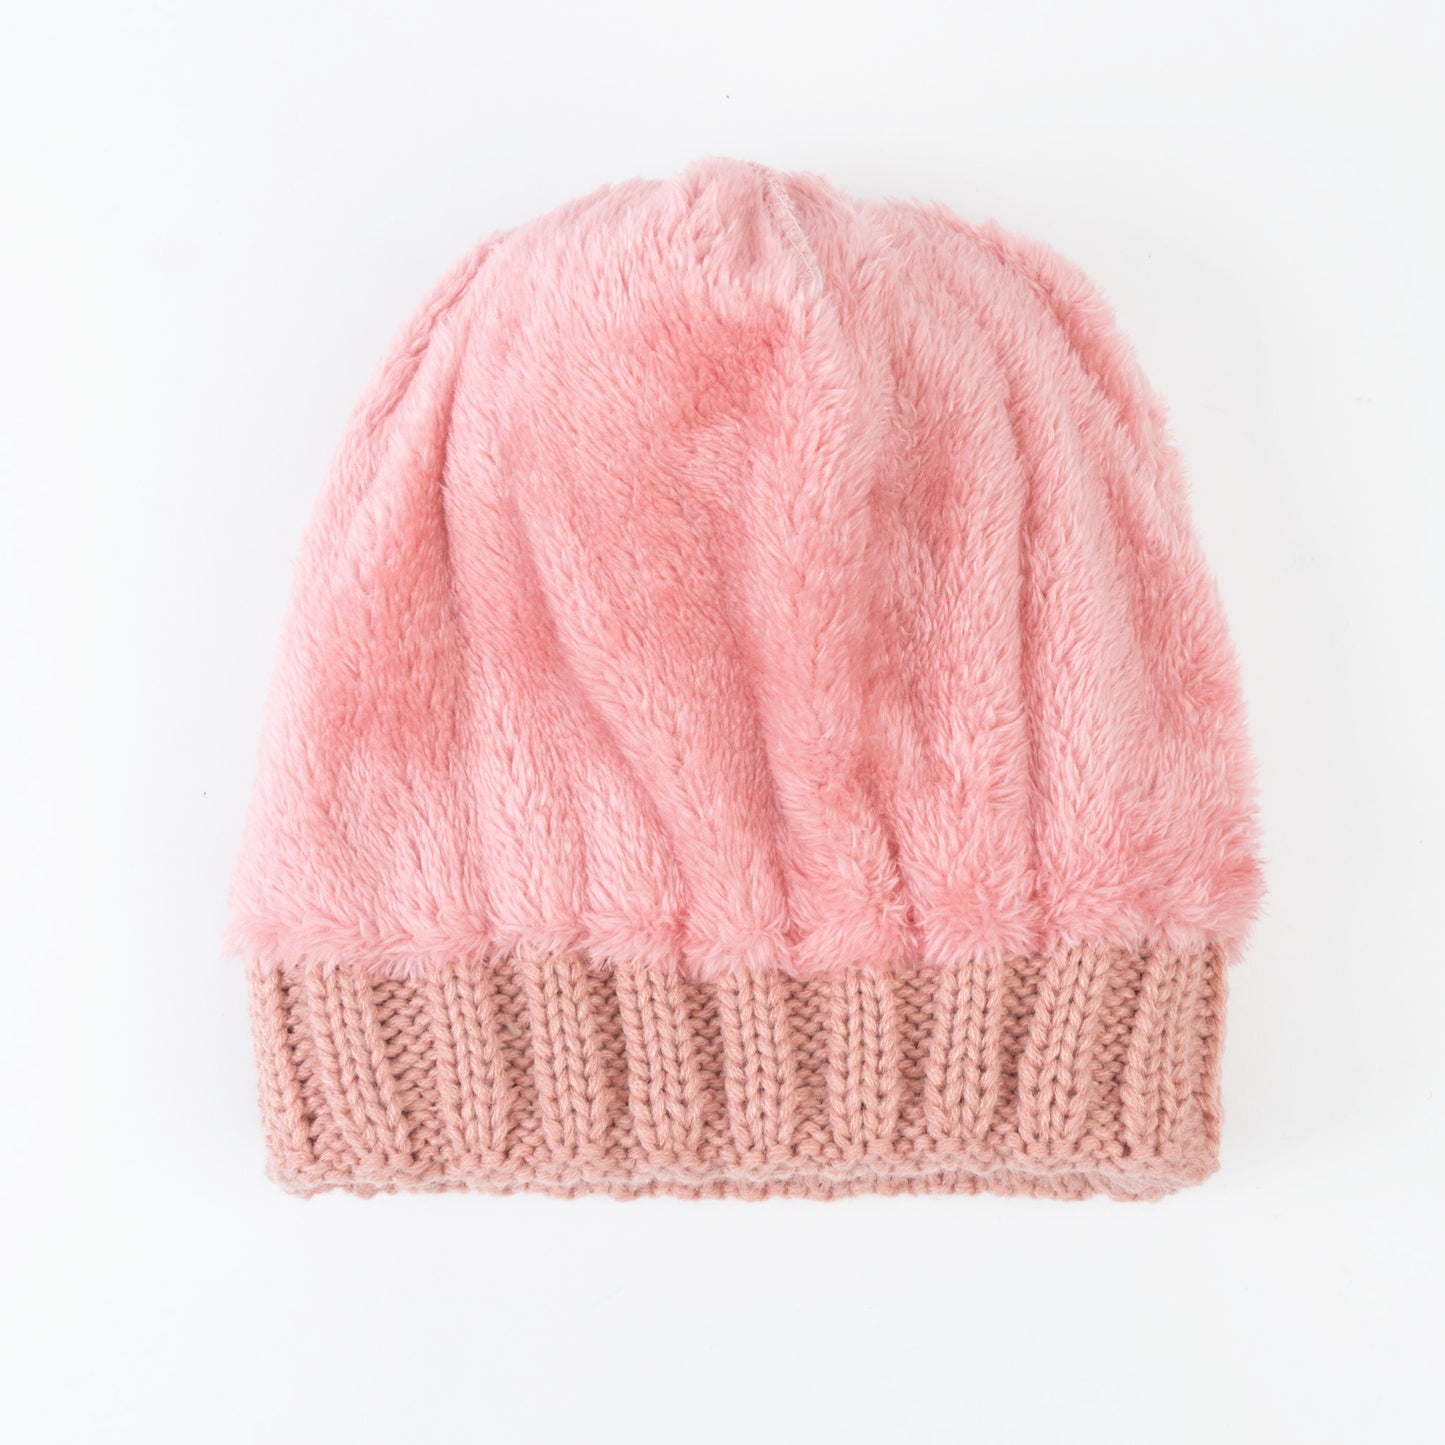 Sierra Cable Knit Pom Lined Beanie Hat